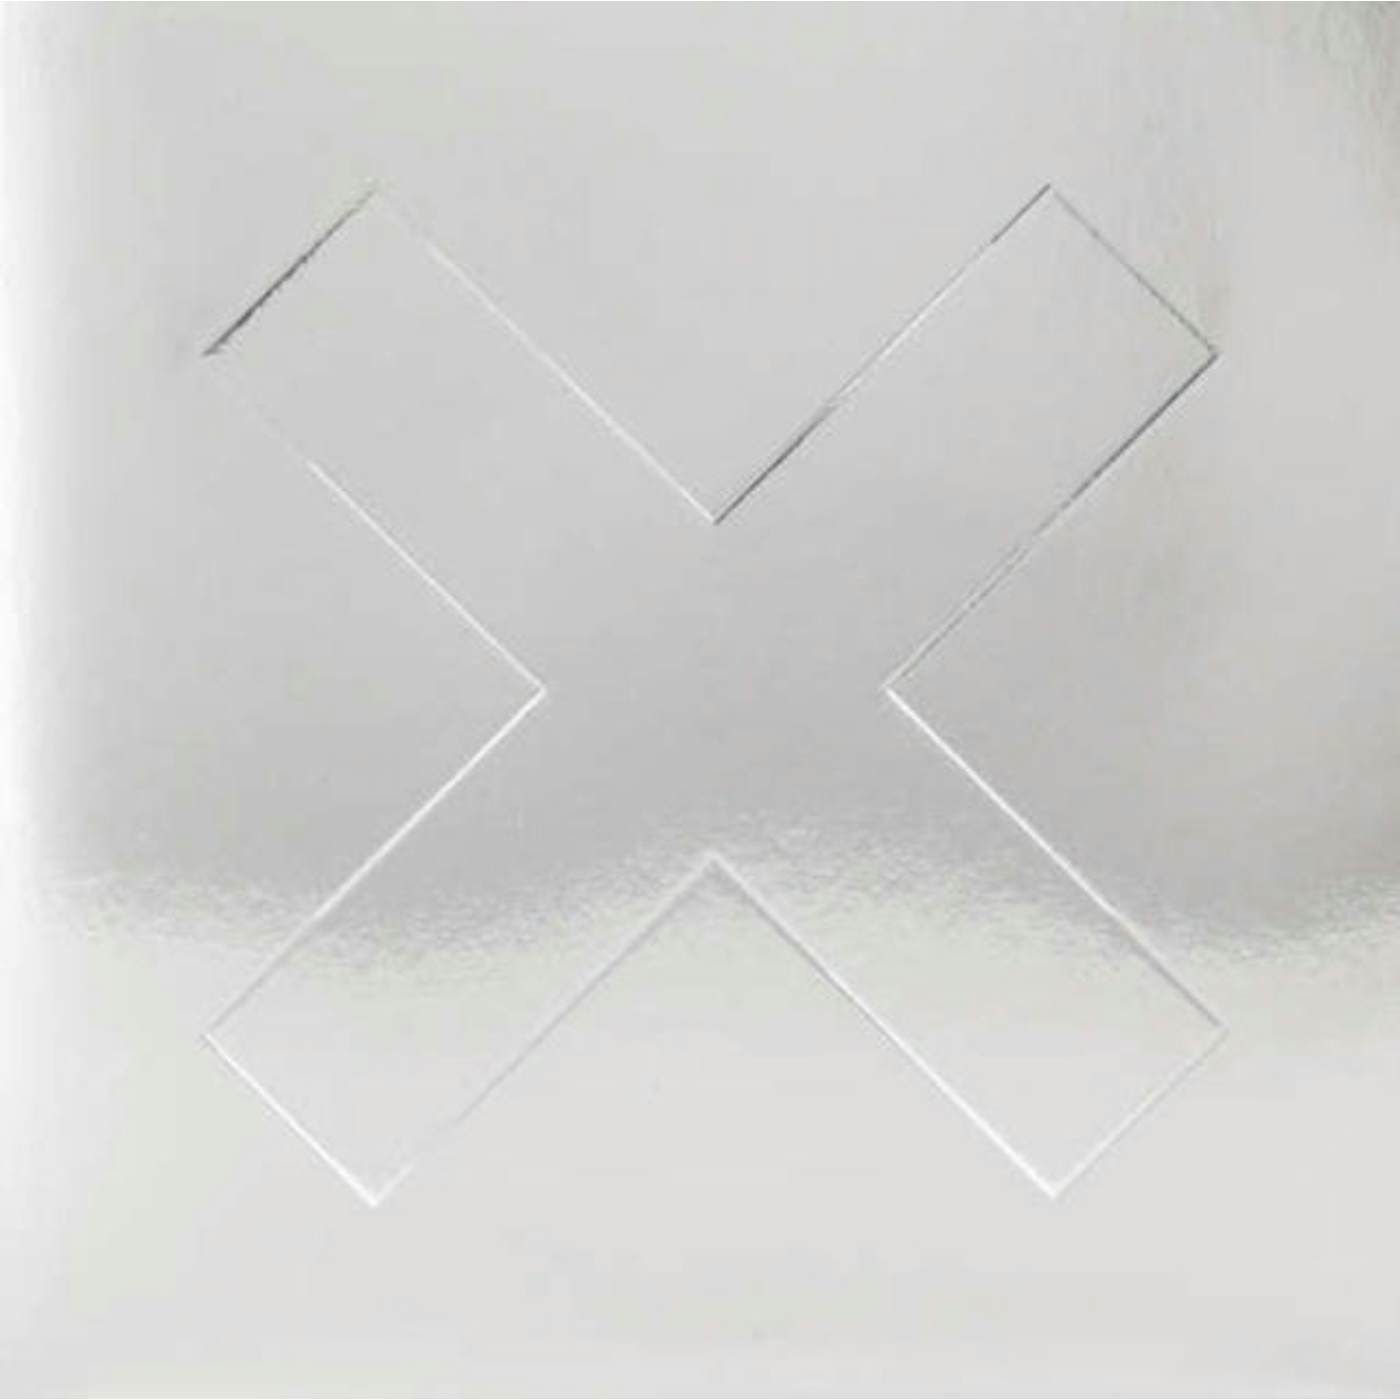 The xx LP - I See You (Vinyl)